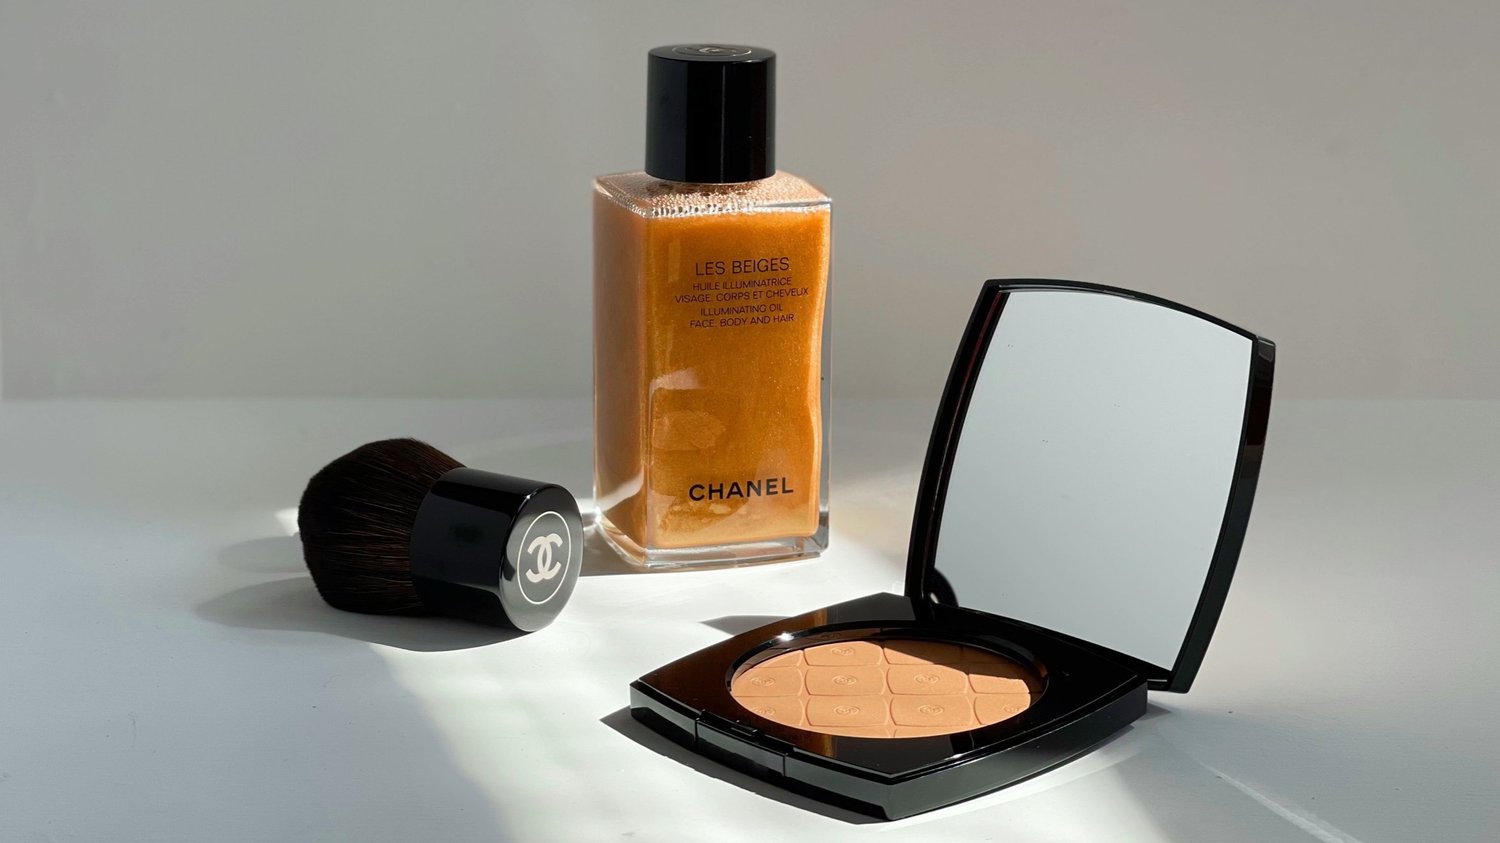 NEW Chanel Les Beiges Summer 2022 Collection, Sunkiss - Medium